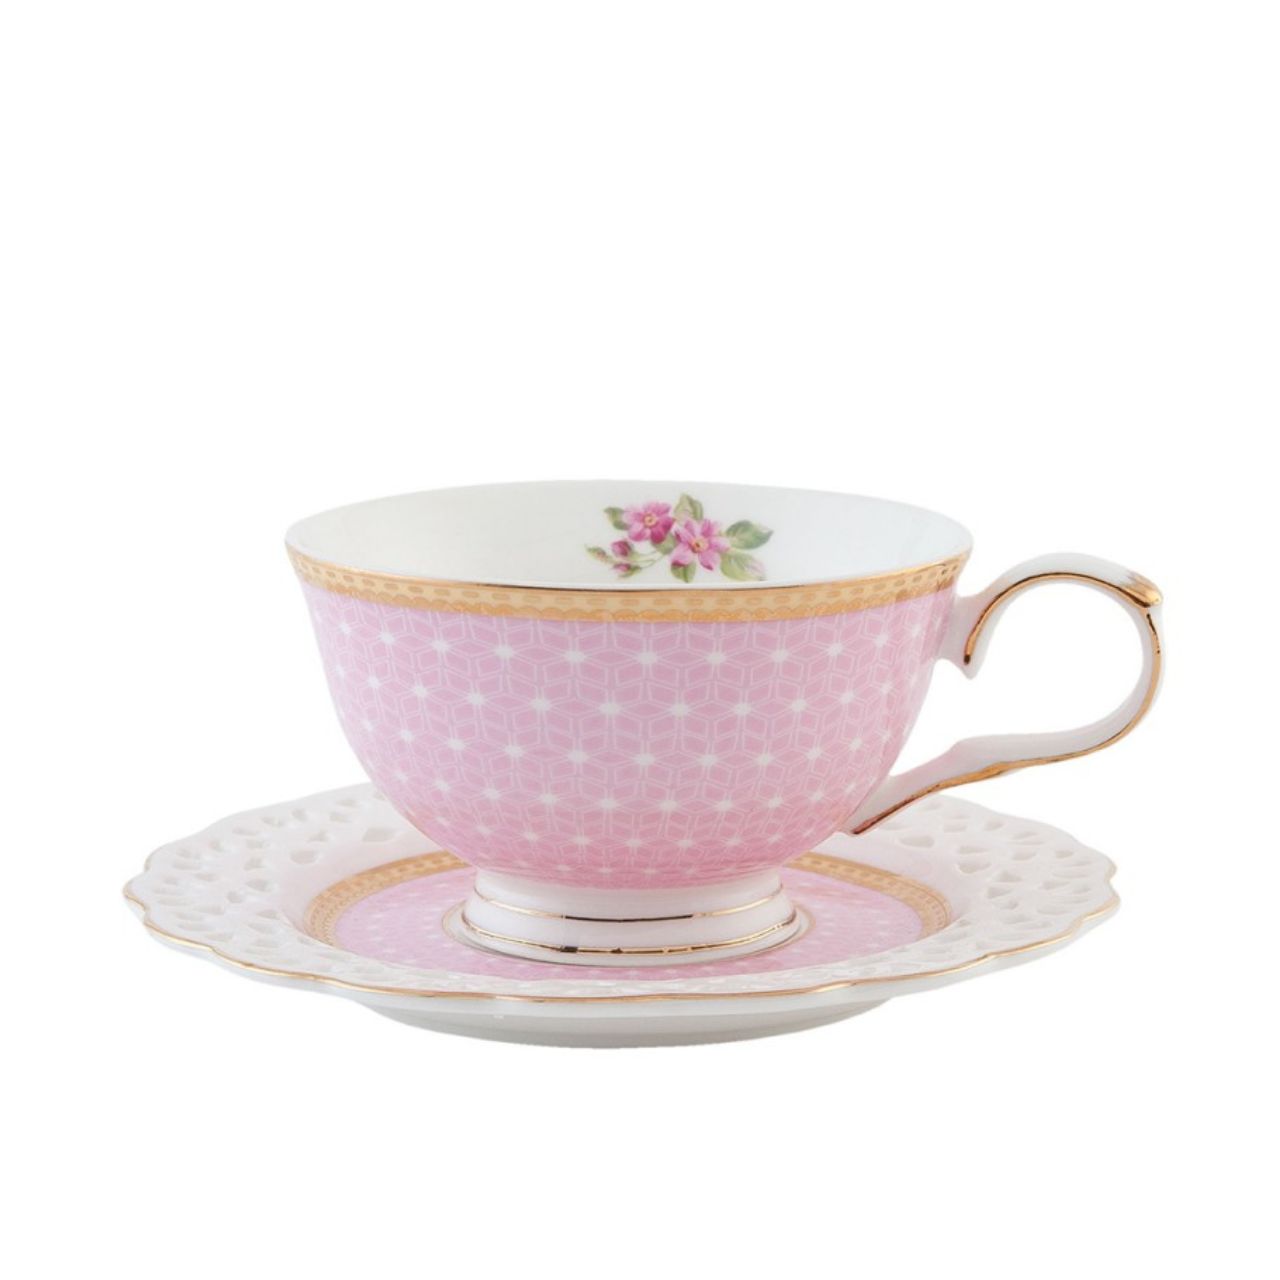 Create a refined and stylish drinking experience with our beautiful ceramic cup and saucer set. This elegant set is a perfect addition to your tableware and adds a touch of luxury to your daily coffee and tea moments.